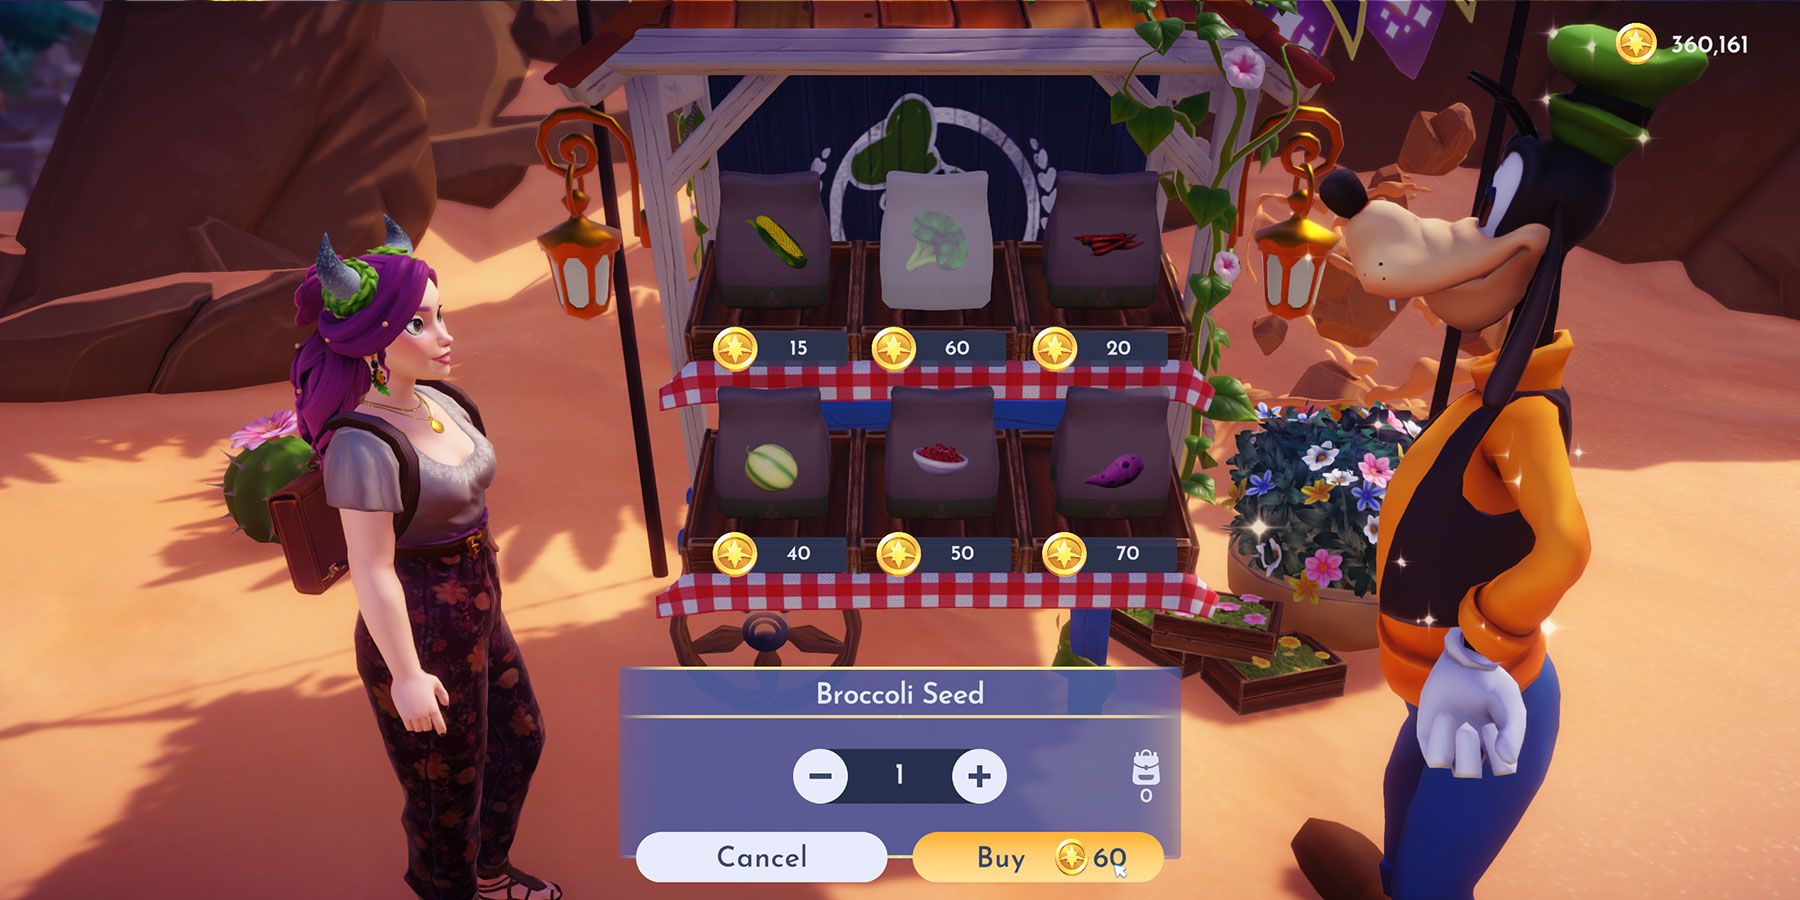 Buying Broccoli Seeds from Goofy's Stall in Disney Dreamlight Valley